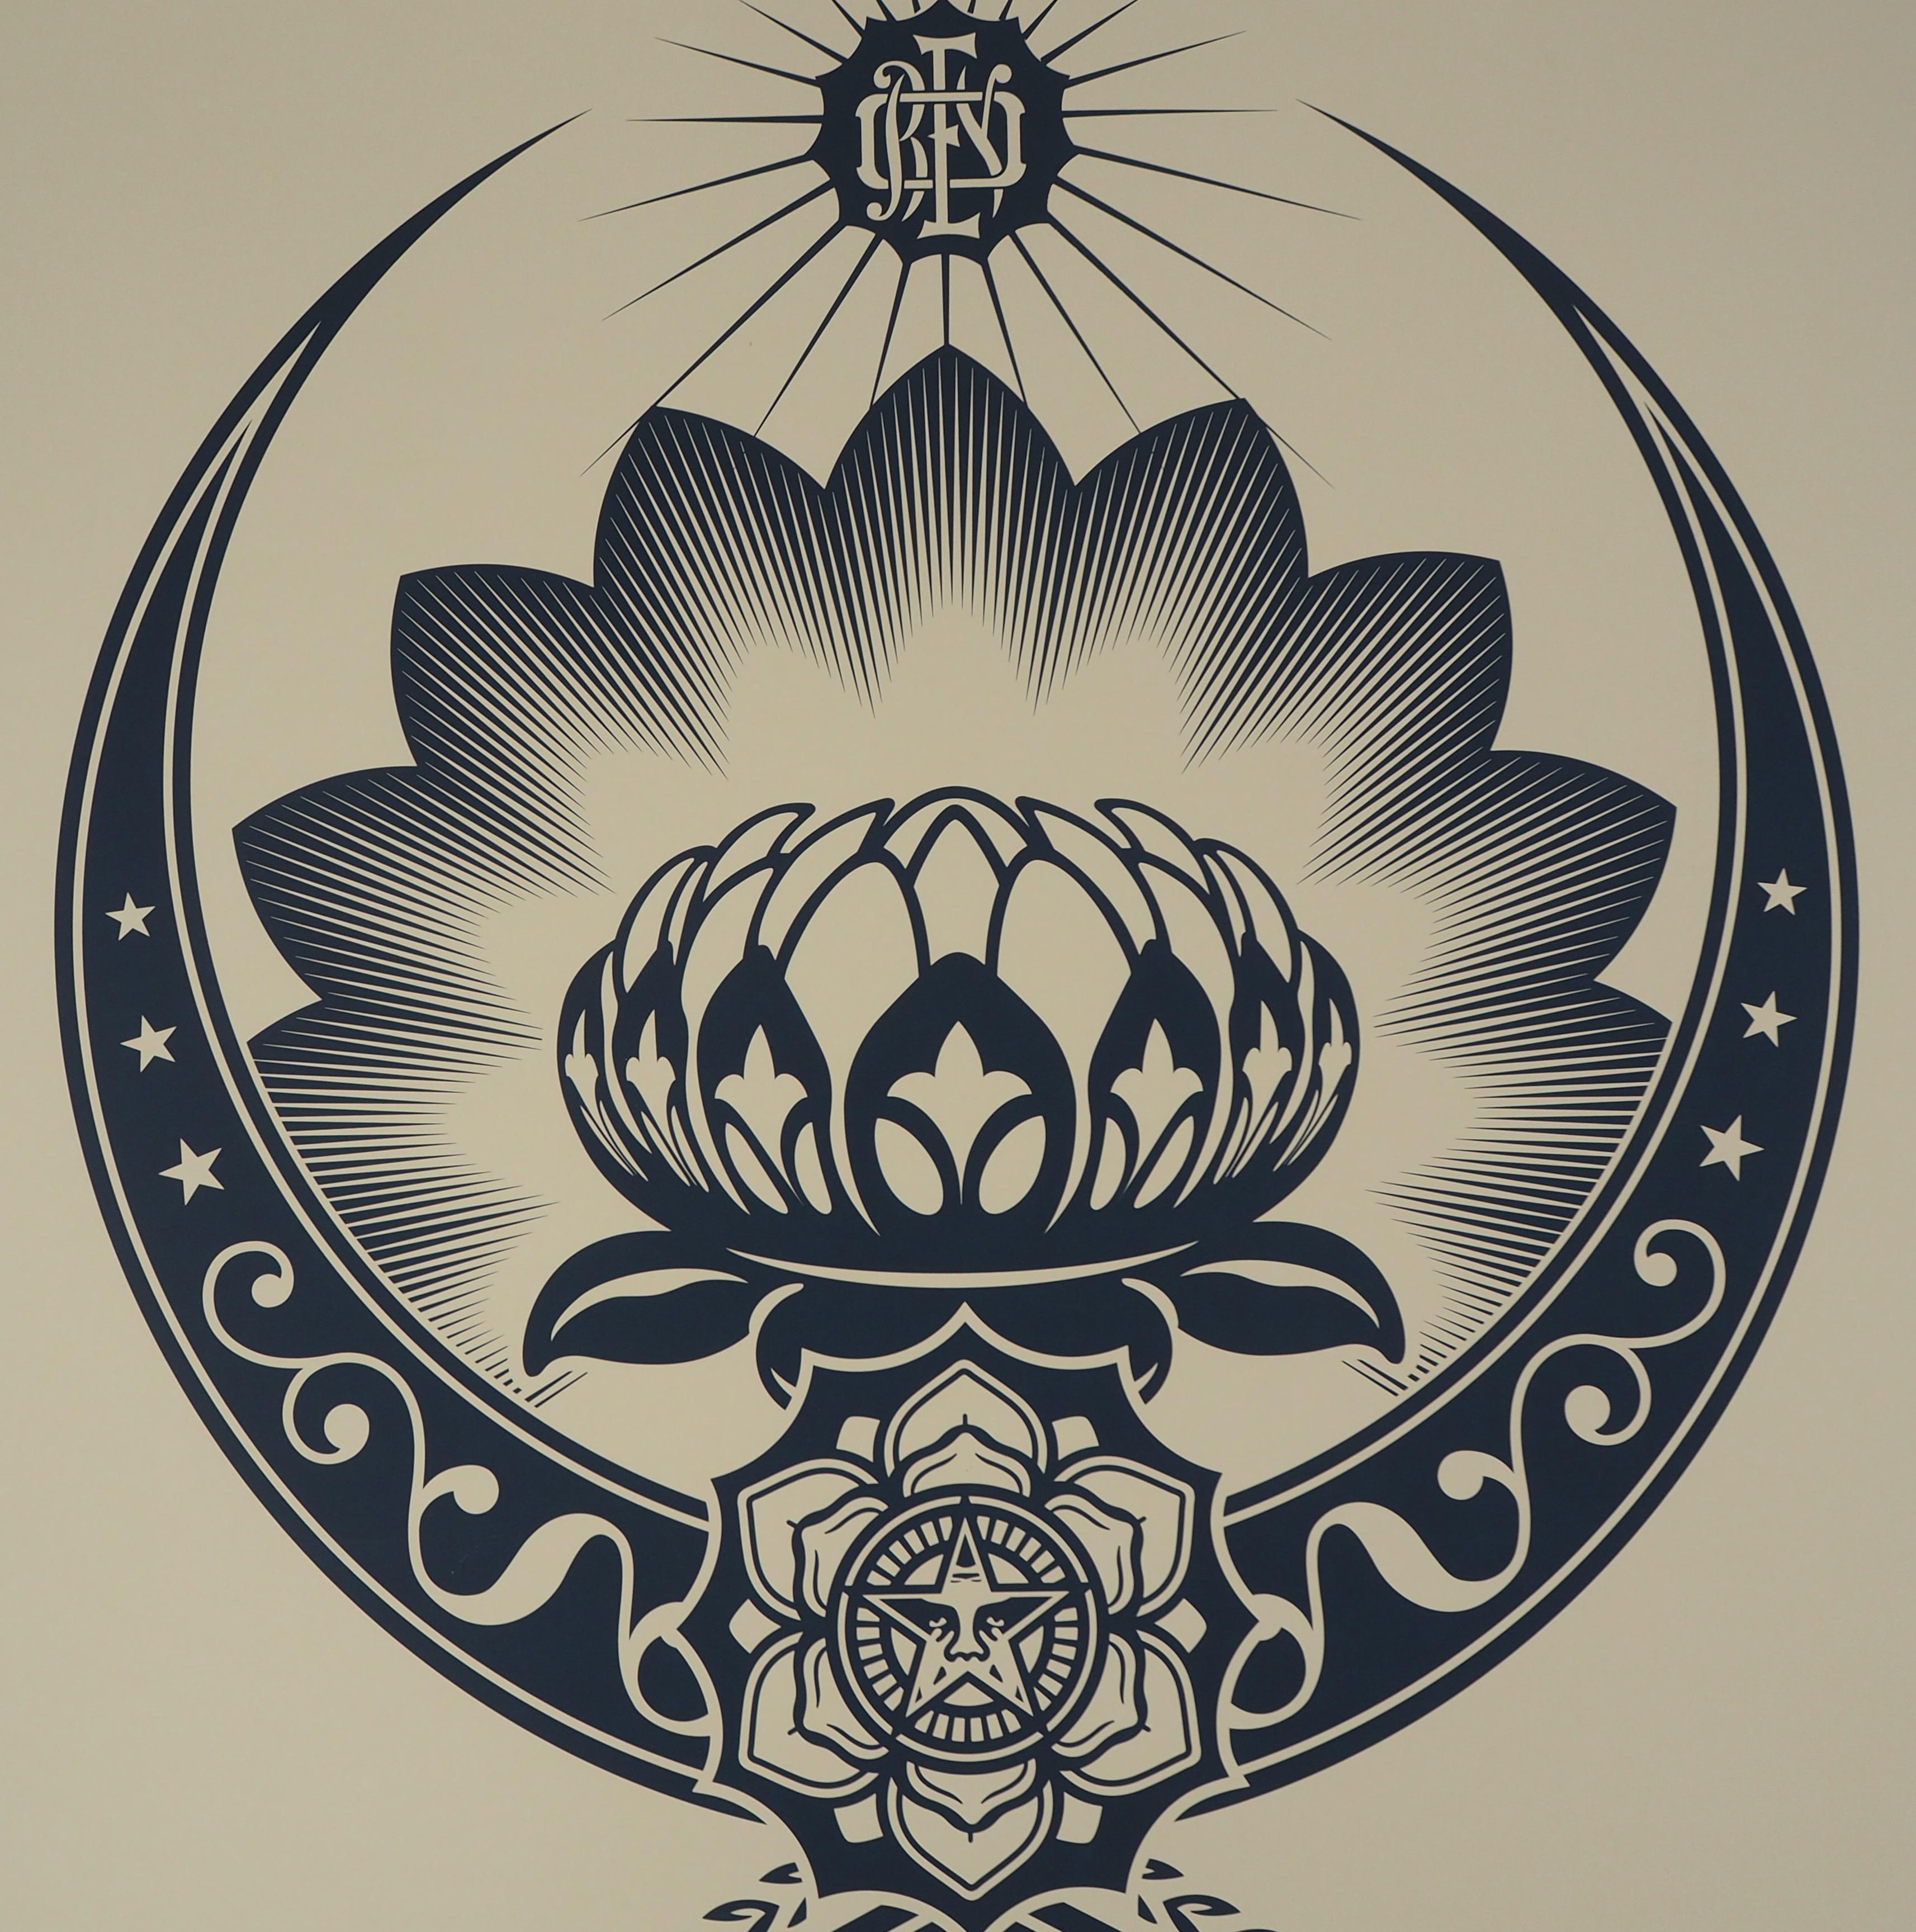 Shepard FAIREY (Obey Giant)
Harmony : The Lotus Flower

Original sceen print
Handsigned in pencil
Authenticated with blind stamp on the artist
Numbered / 89
On vellum 41 x 30 inch (c. 104 x 76 cm)

Comes with Certificate of authenticity of the